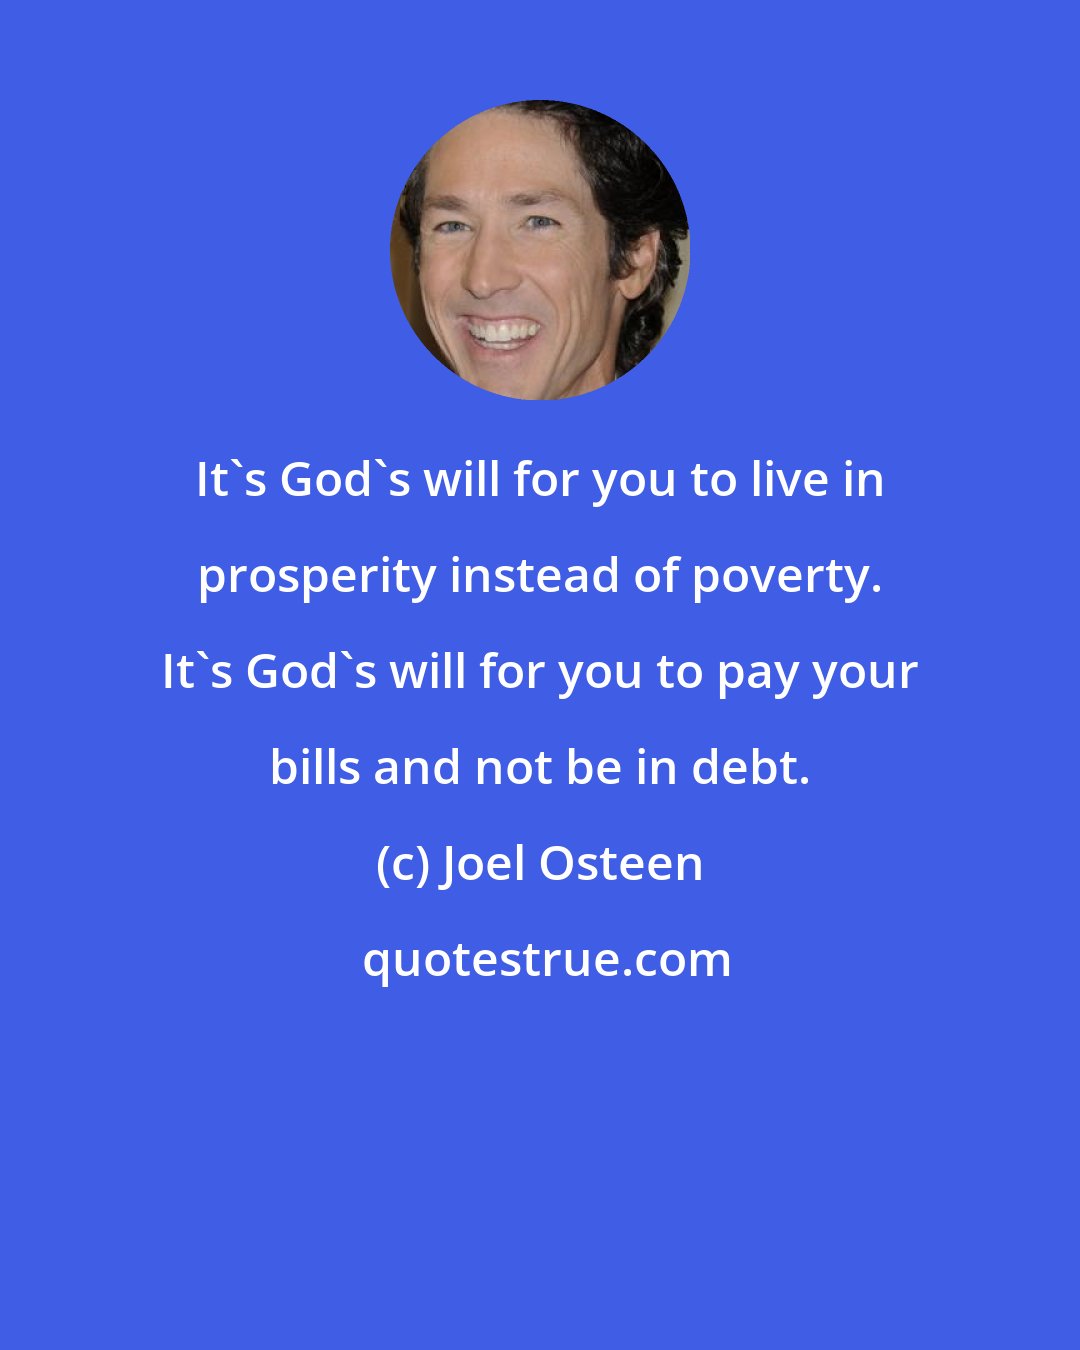 Joel Osteen: It's God's will for you to live in prosperity instead of poverty. It's God's will for you to pay your bills and not be in debt.